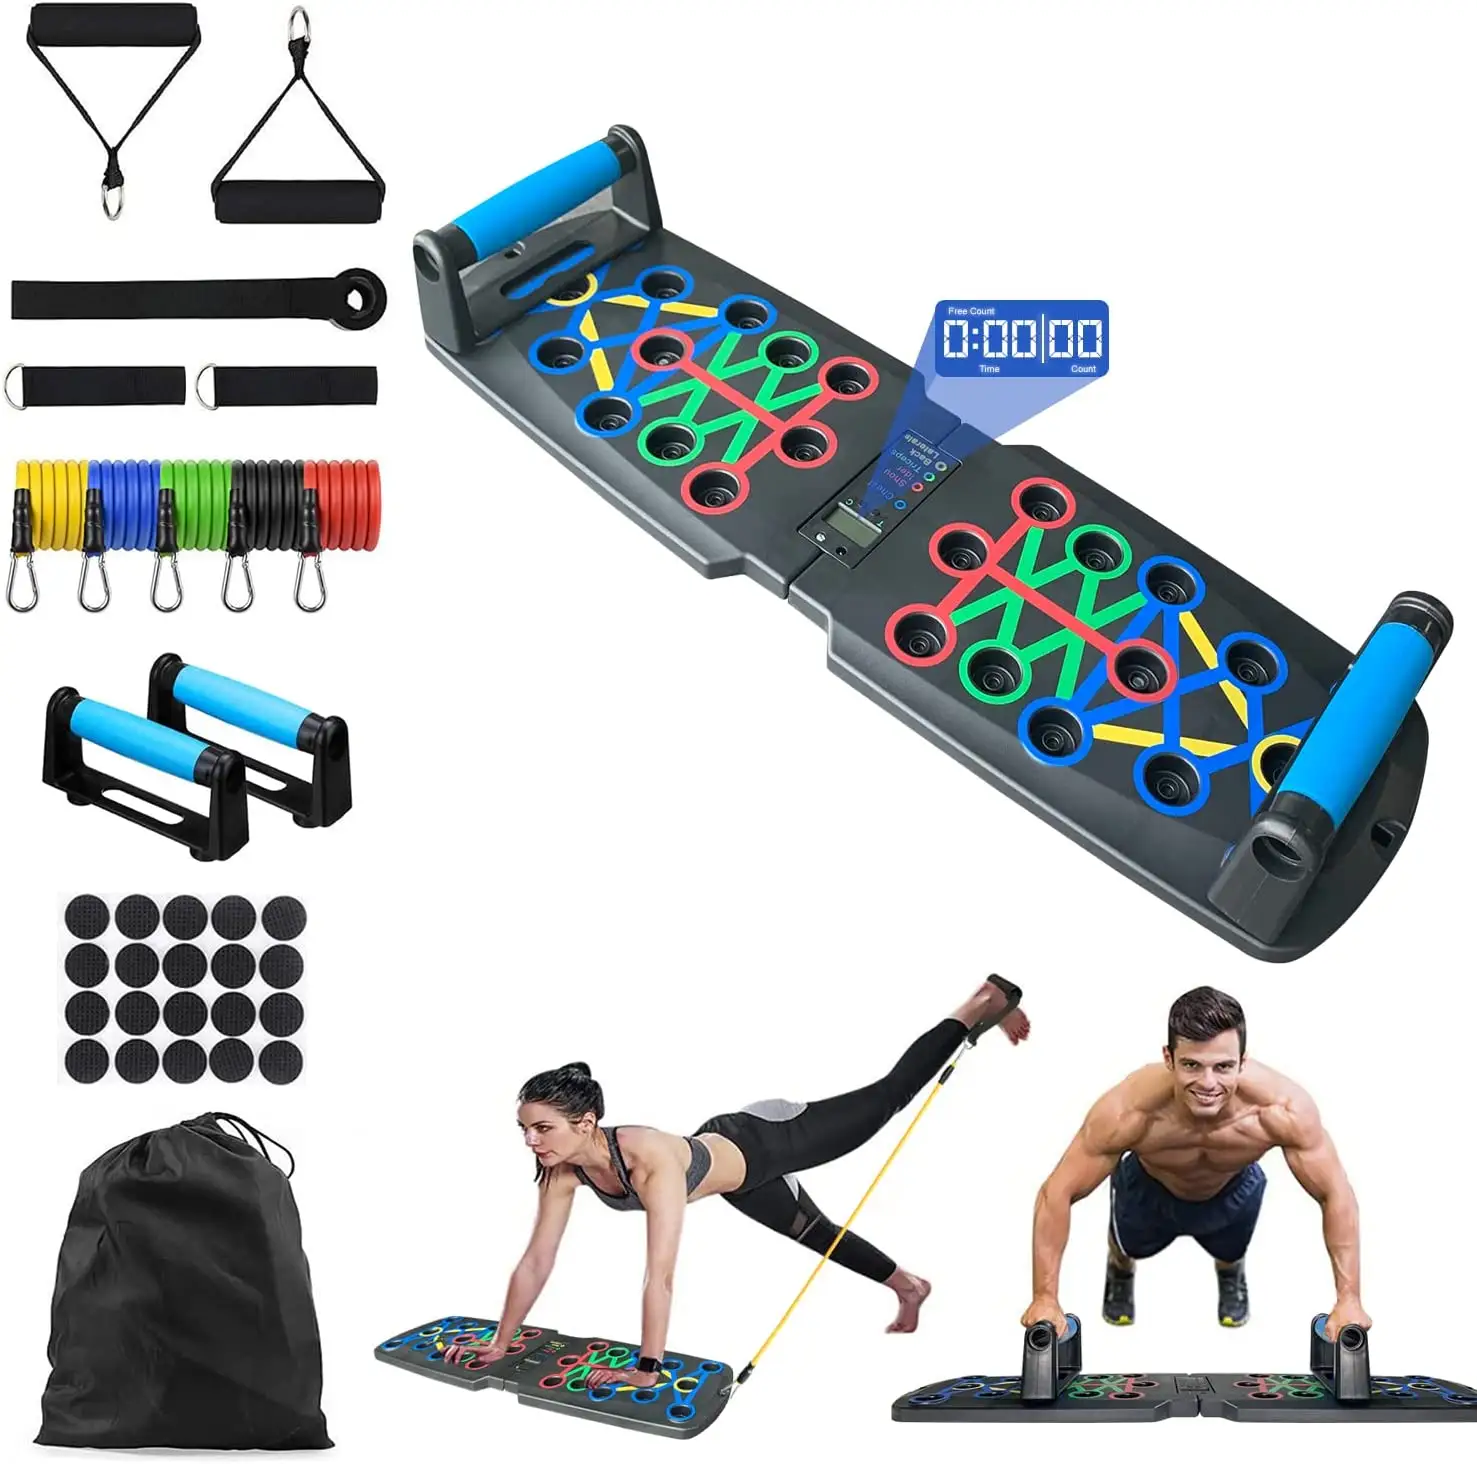 Wellshow Push Up Board Pushup Board Fitness Home Gym Workout Strength Training Equipment